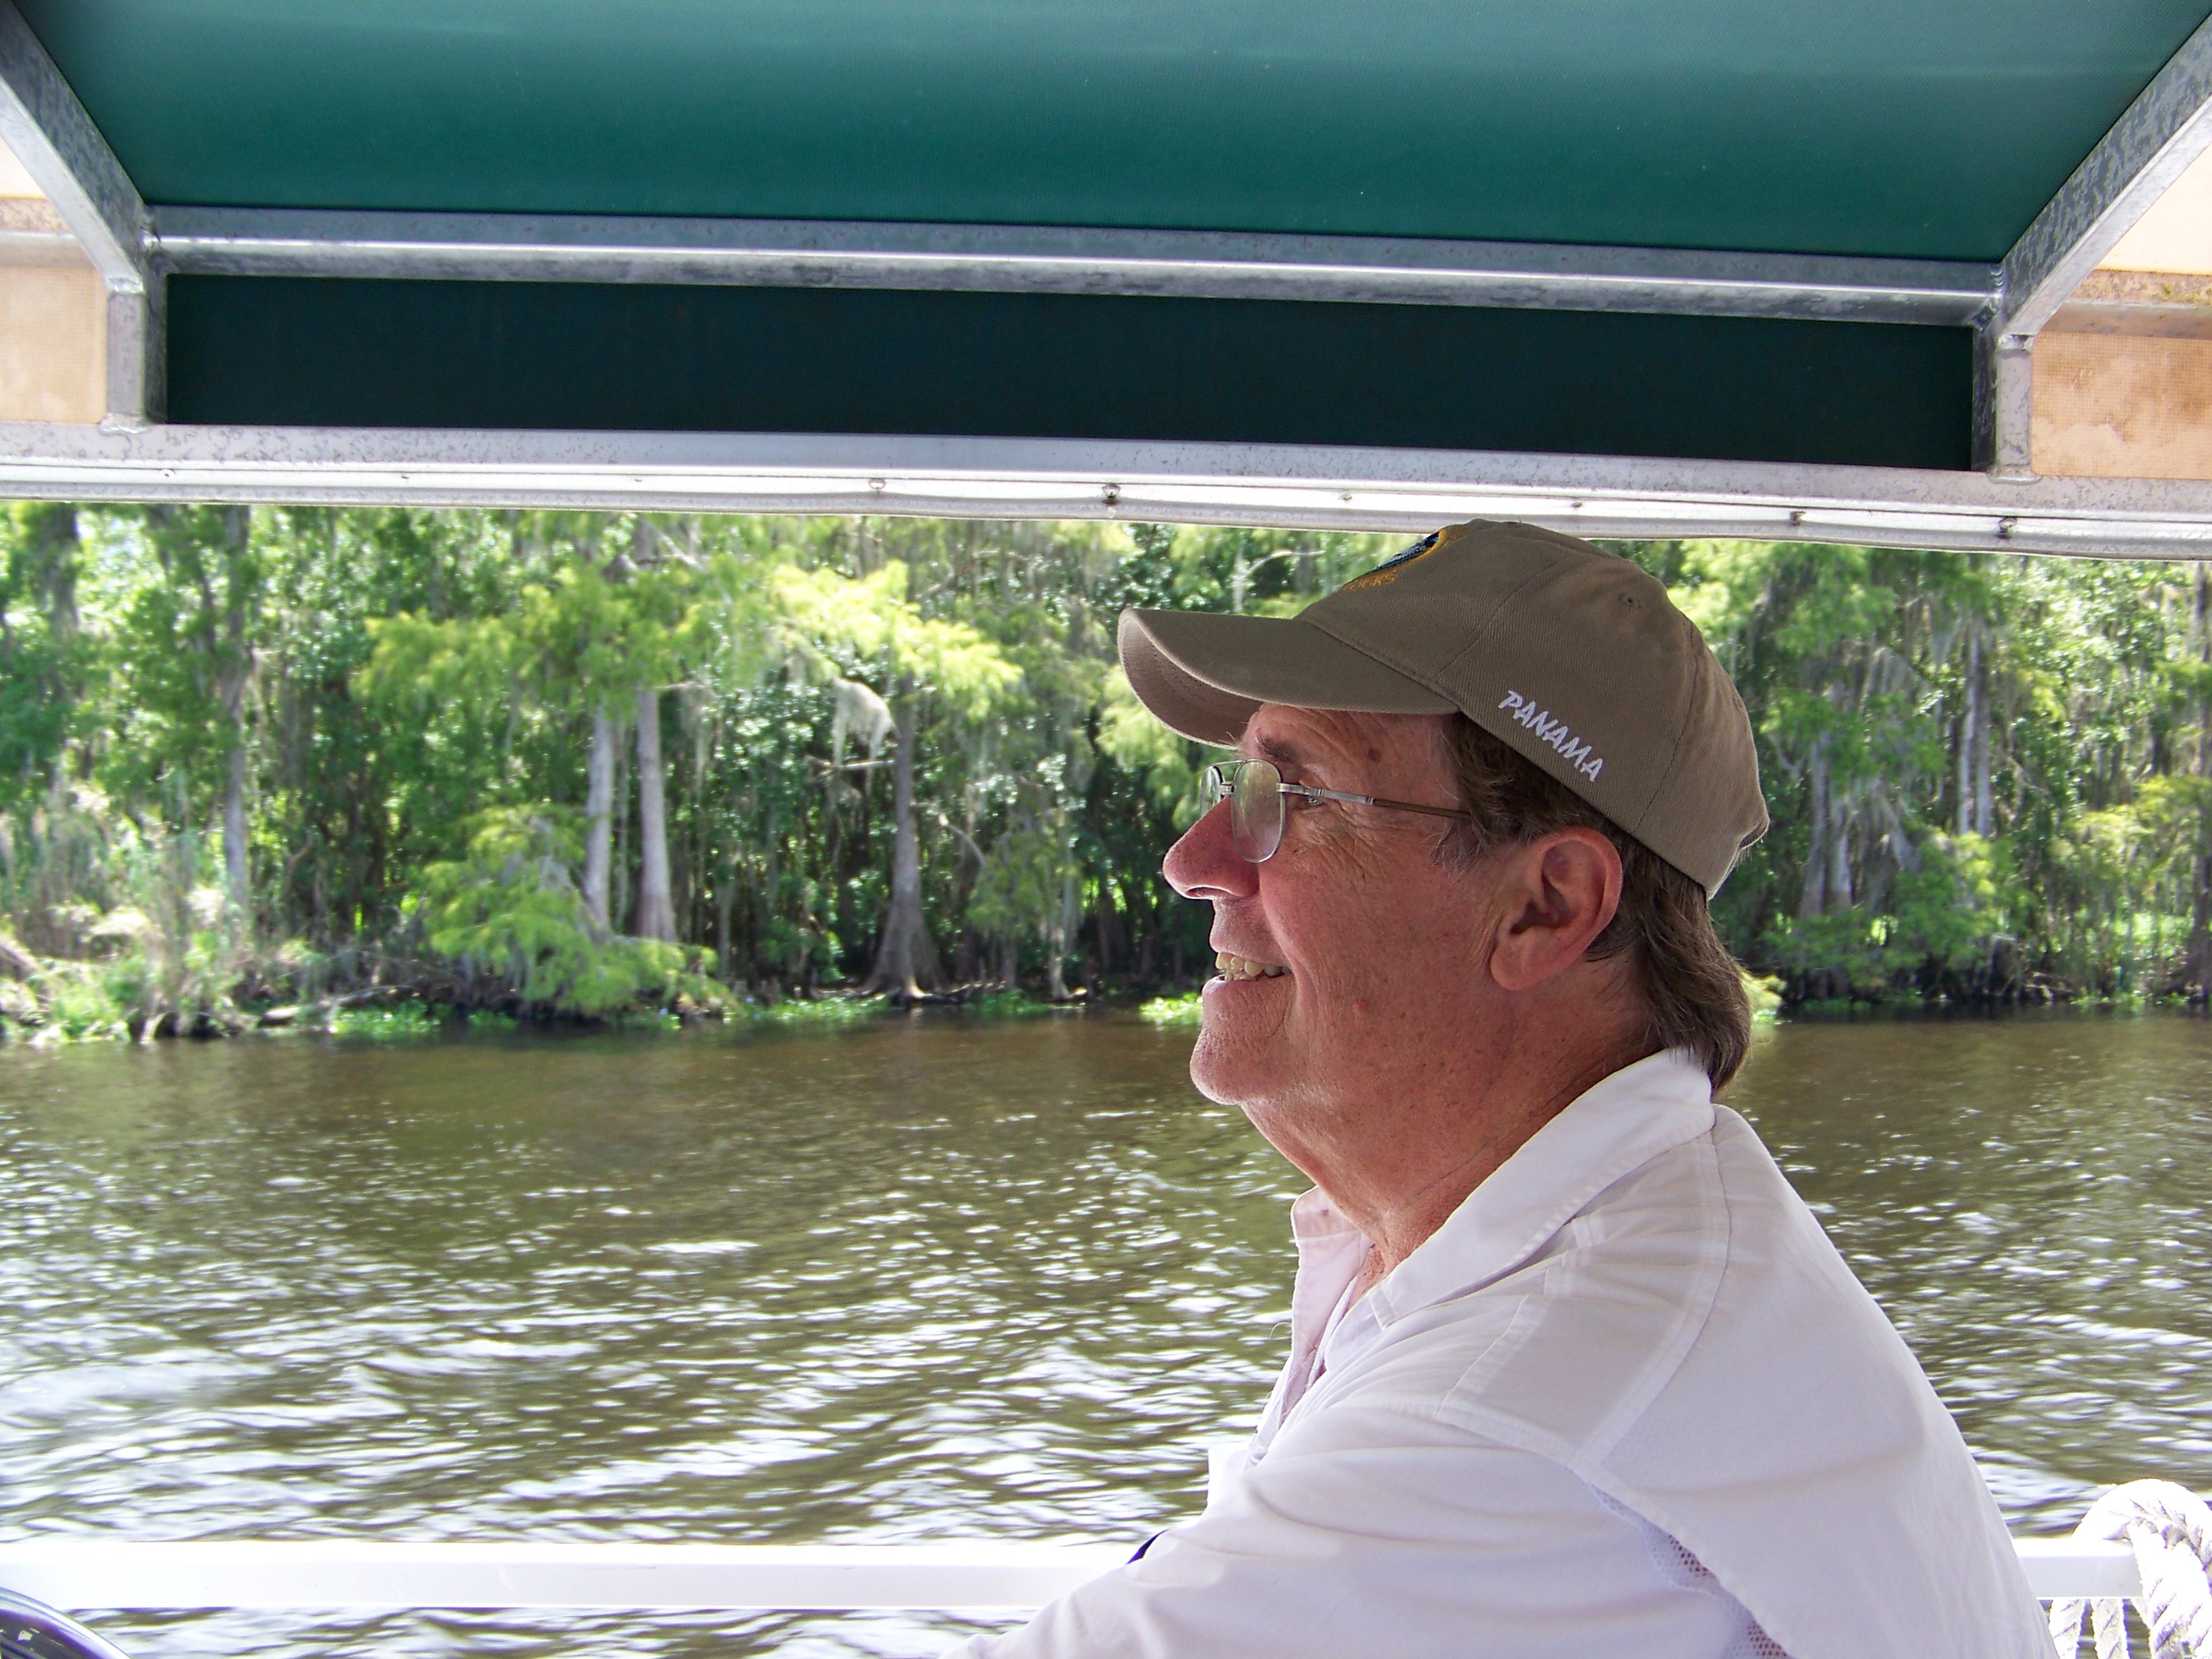 My hero brother, Captain Ron taking me on a peaceful cruise along the St. John's River aboard his Native II.